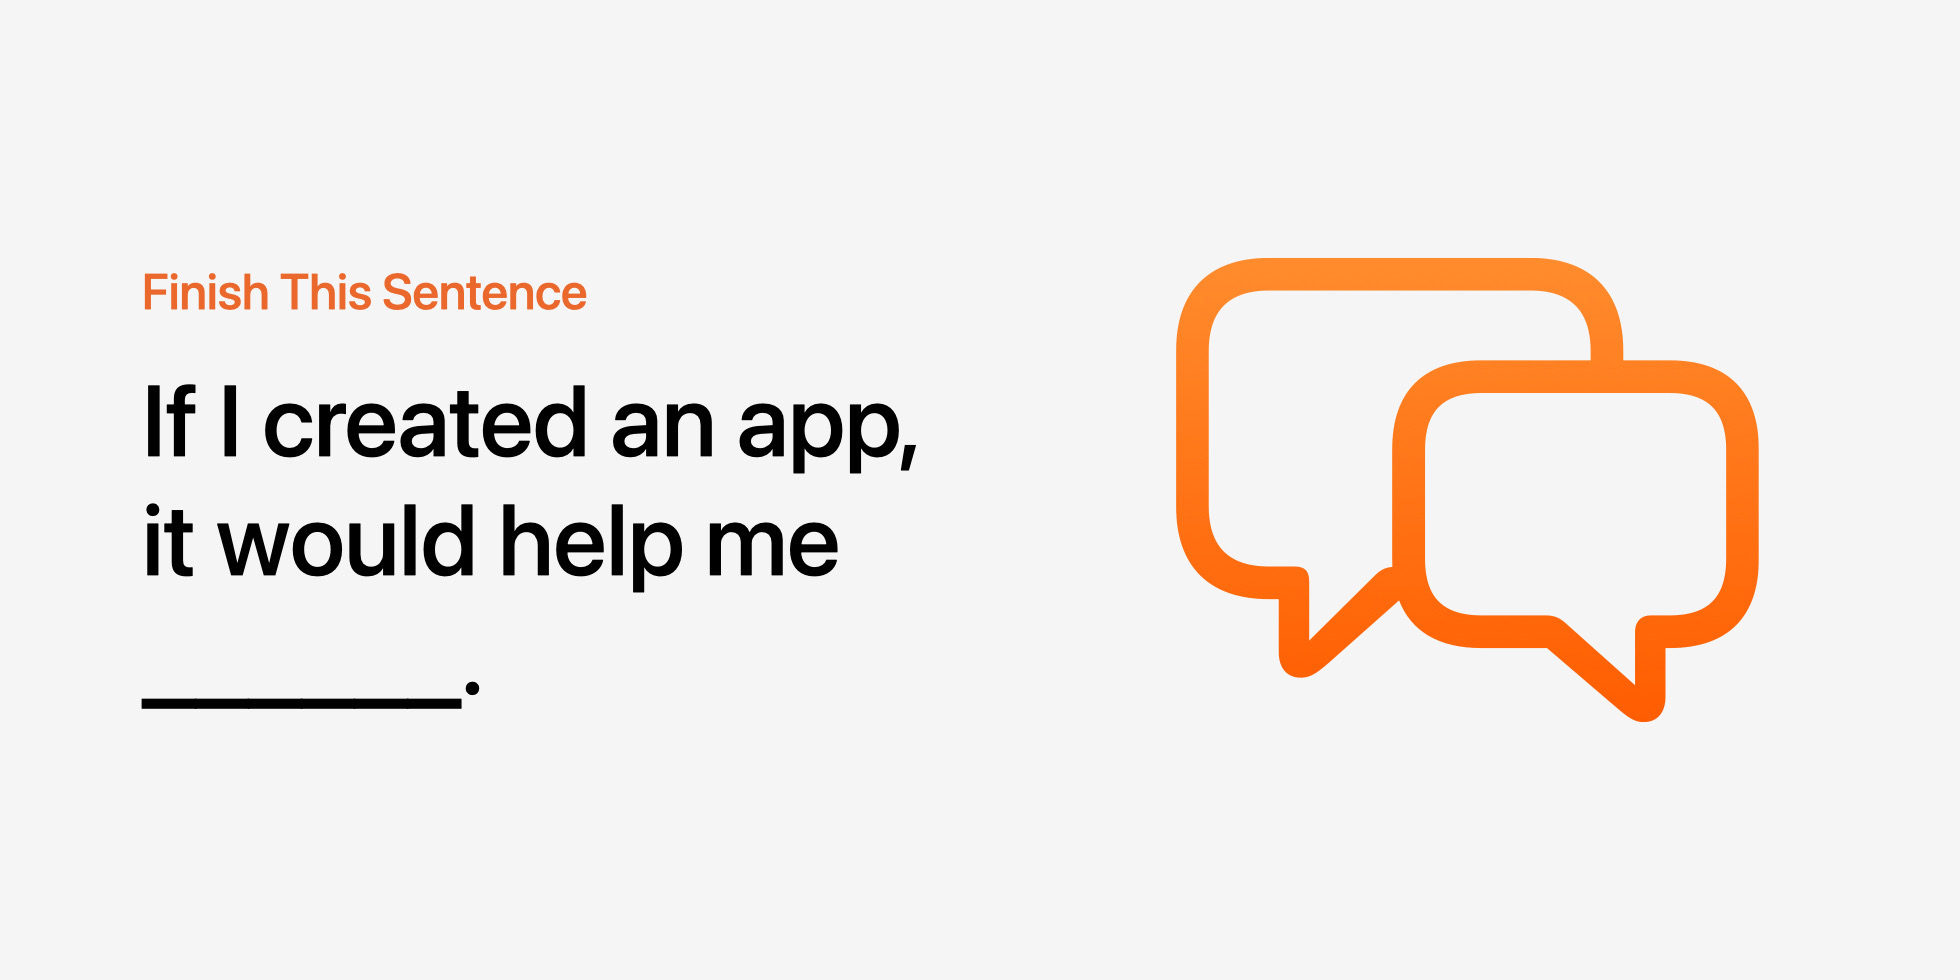 Finish This Sentence. If I created an app, it would help me…